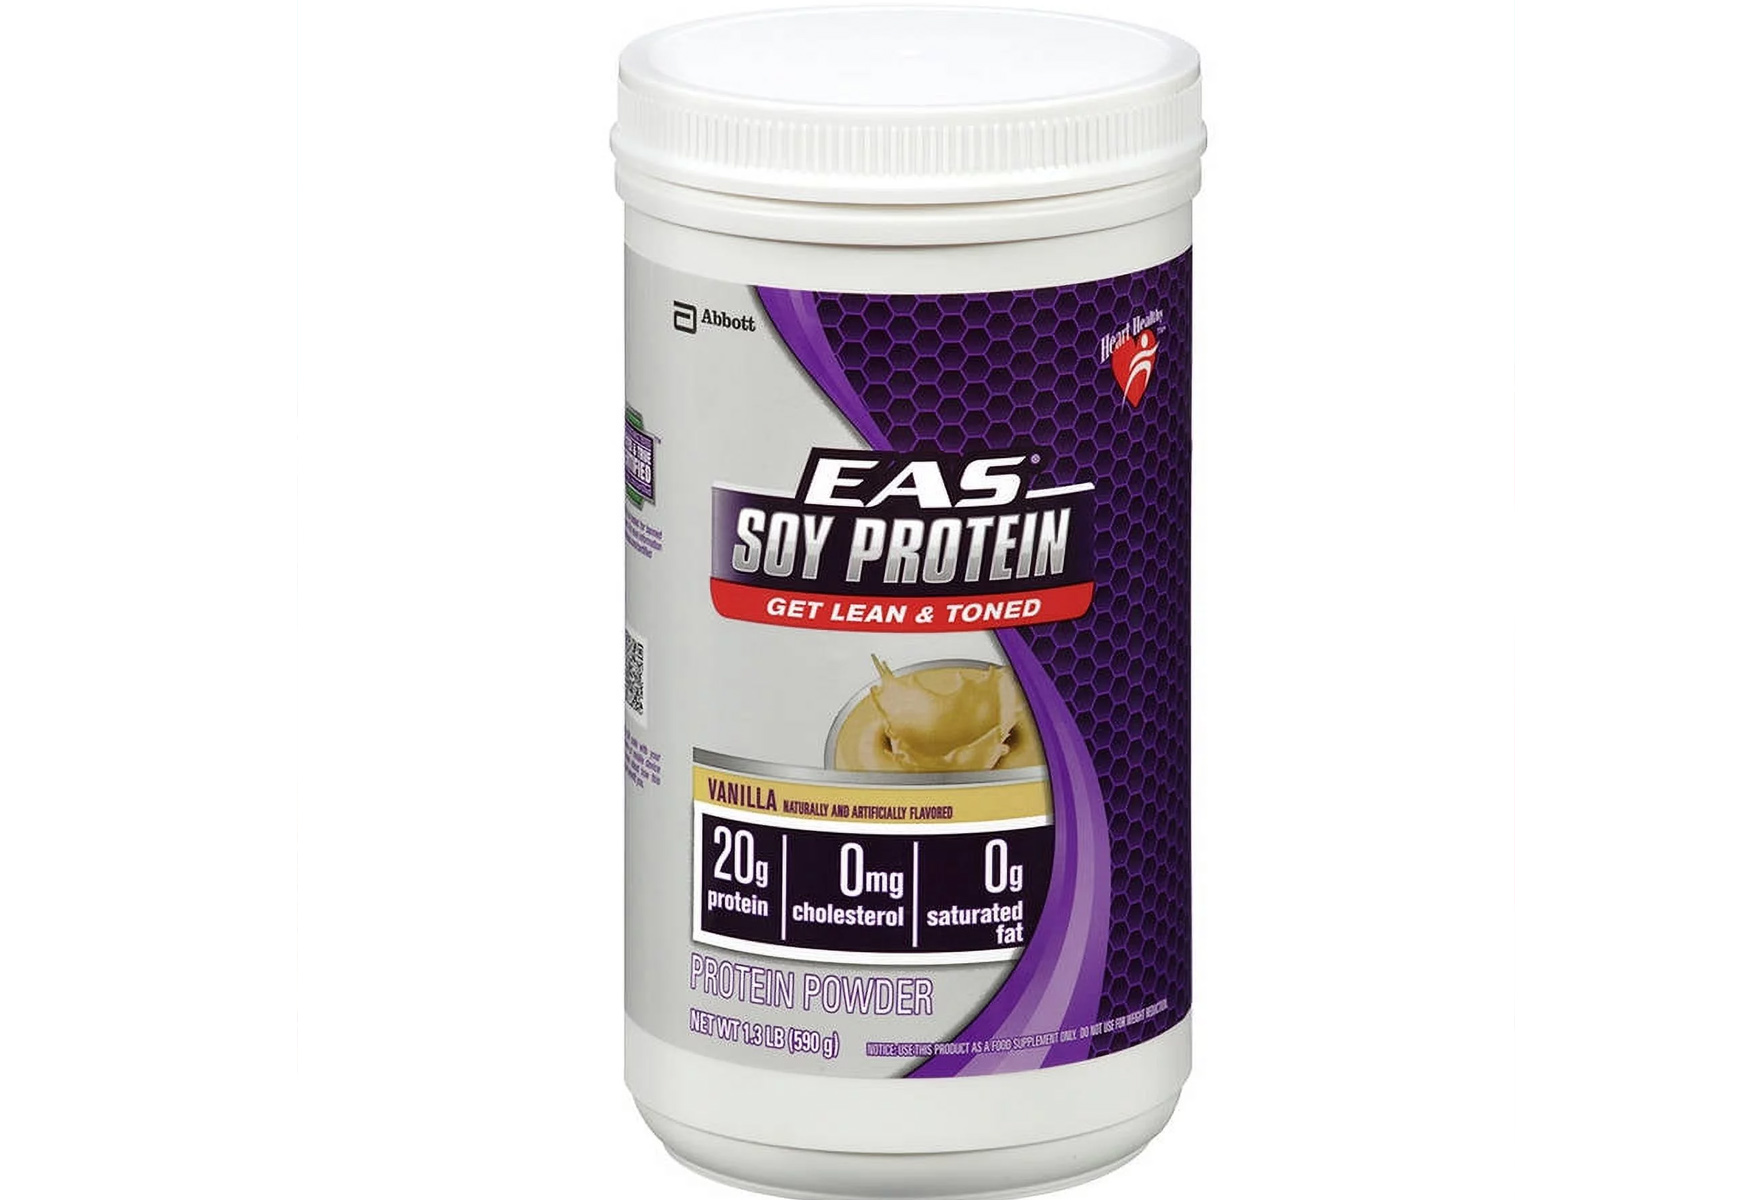 15-eas-soy-protein-nutrition-facts